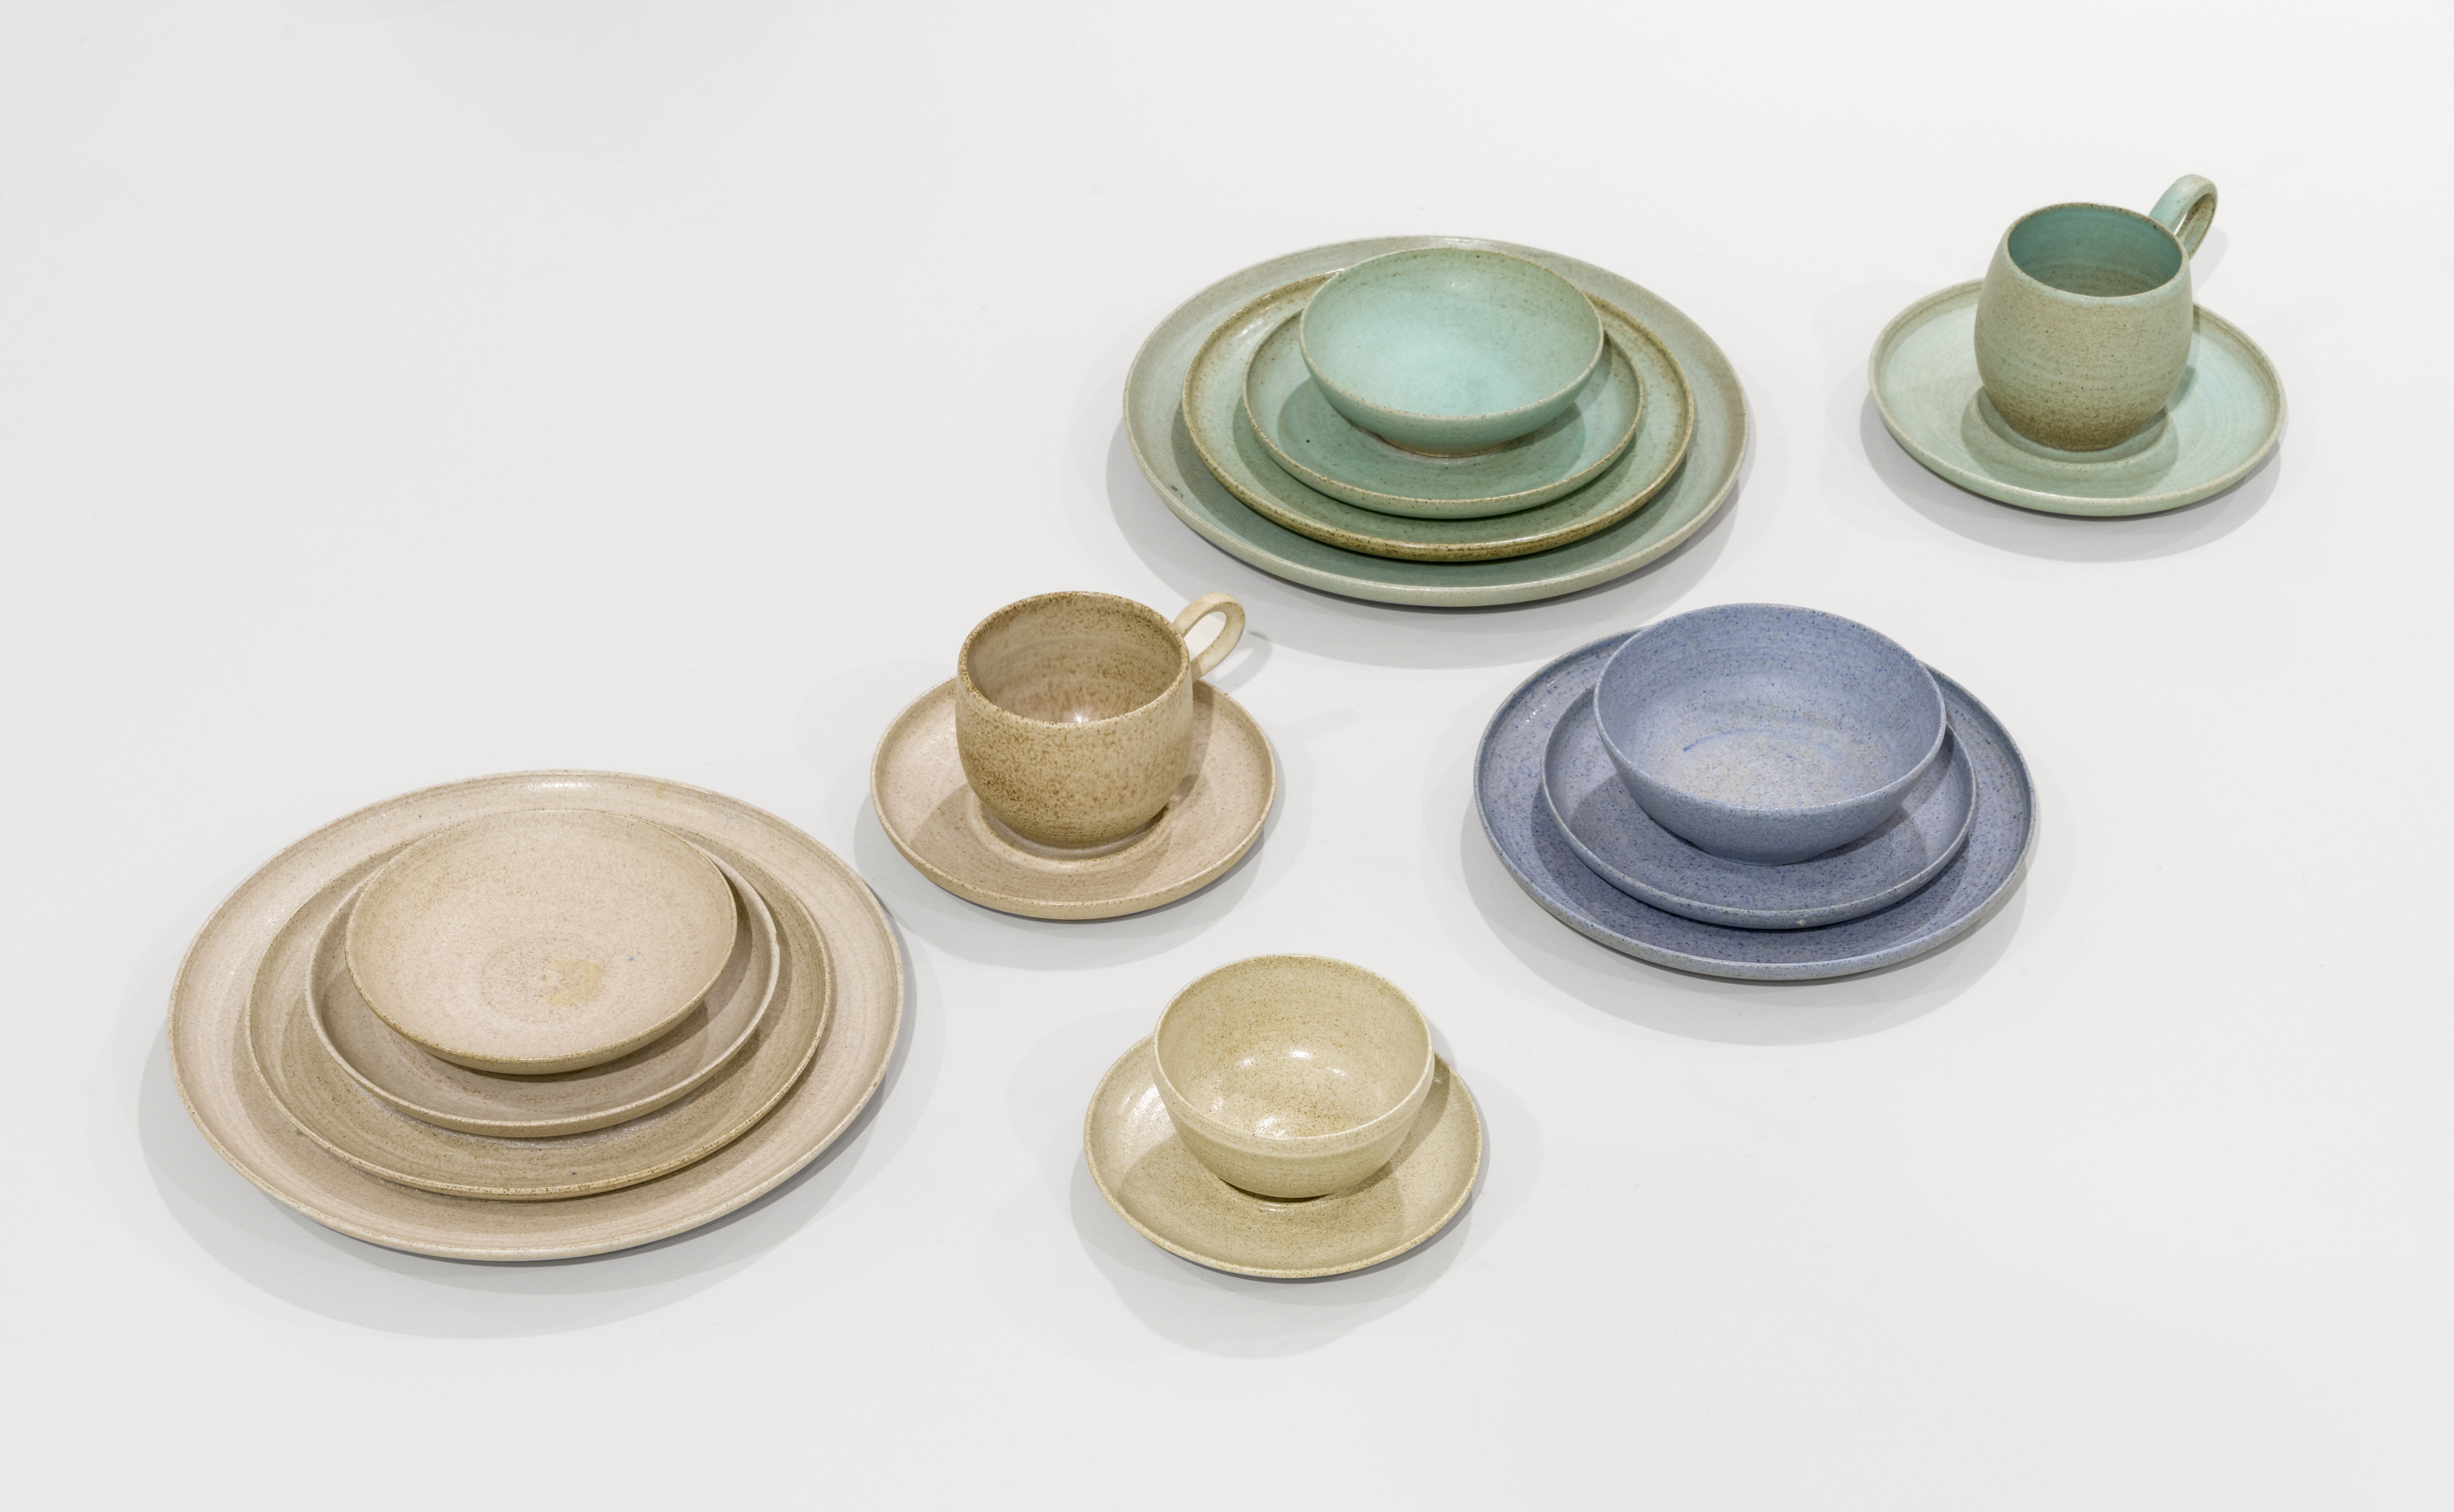 Photograph of pastel-coloured dinnerware sets displayed on a white surface.